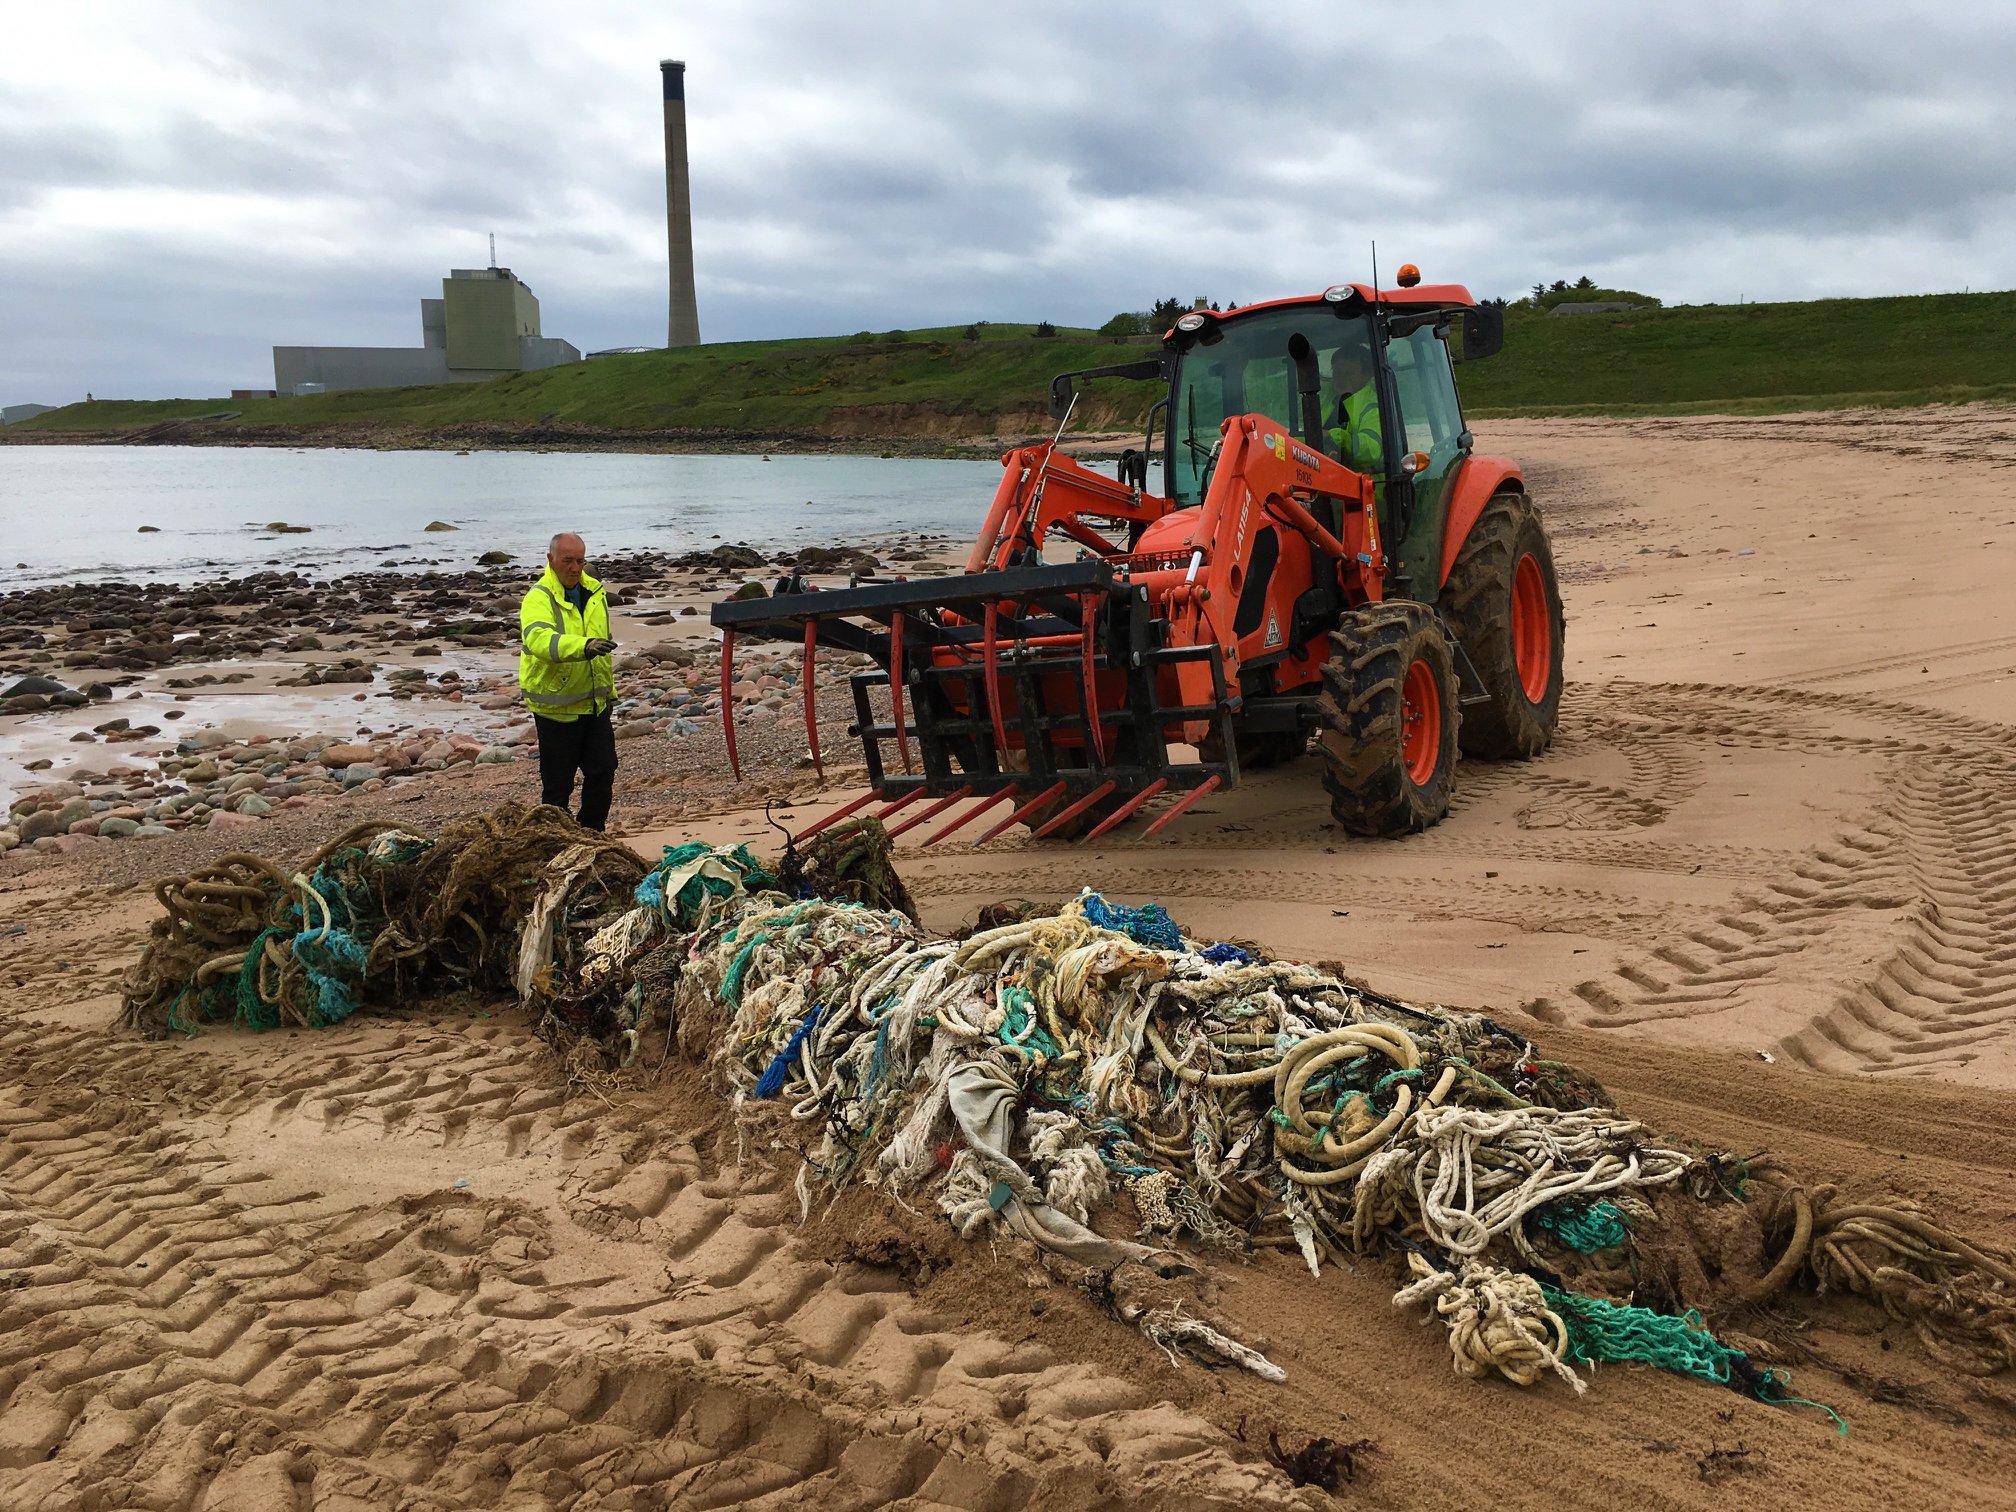 A hefty trail of nets and marine litter pulled from Sandford Bay - picture by Crawford Paris of the Turning the Plastic Tide project